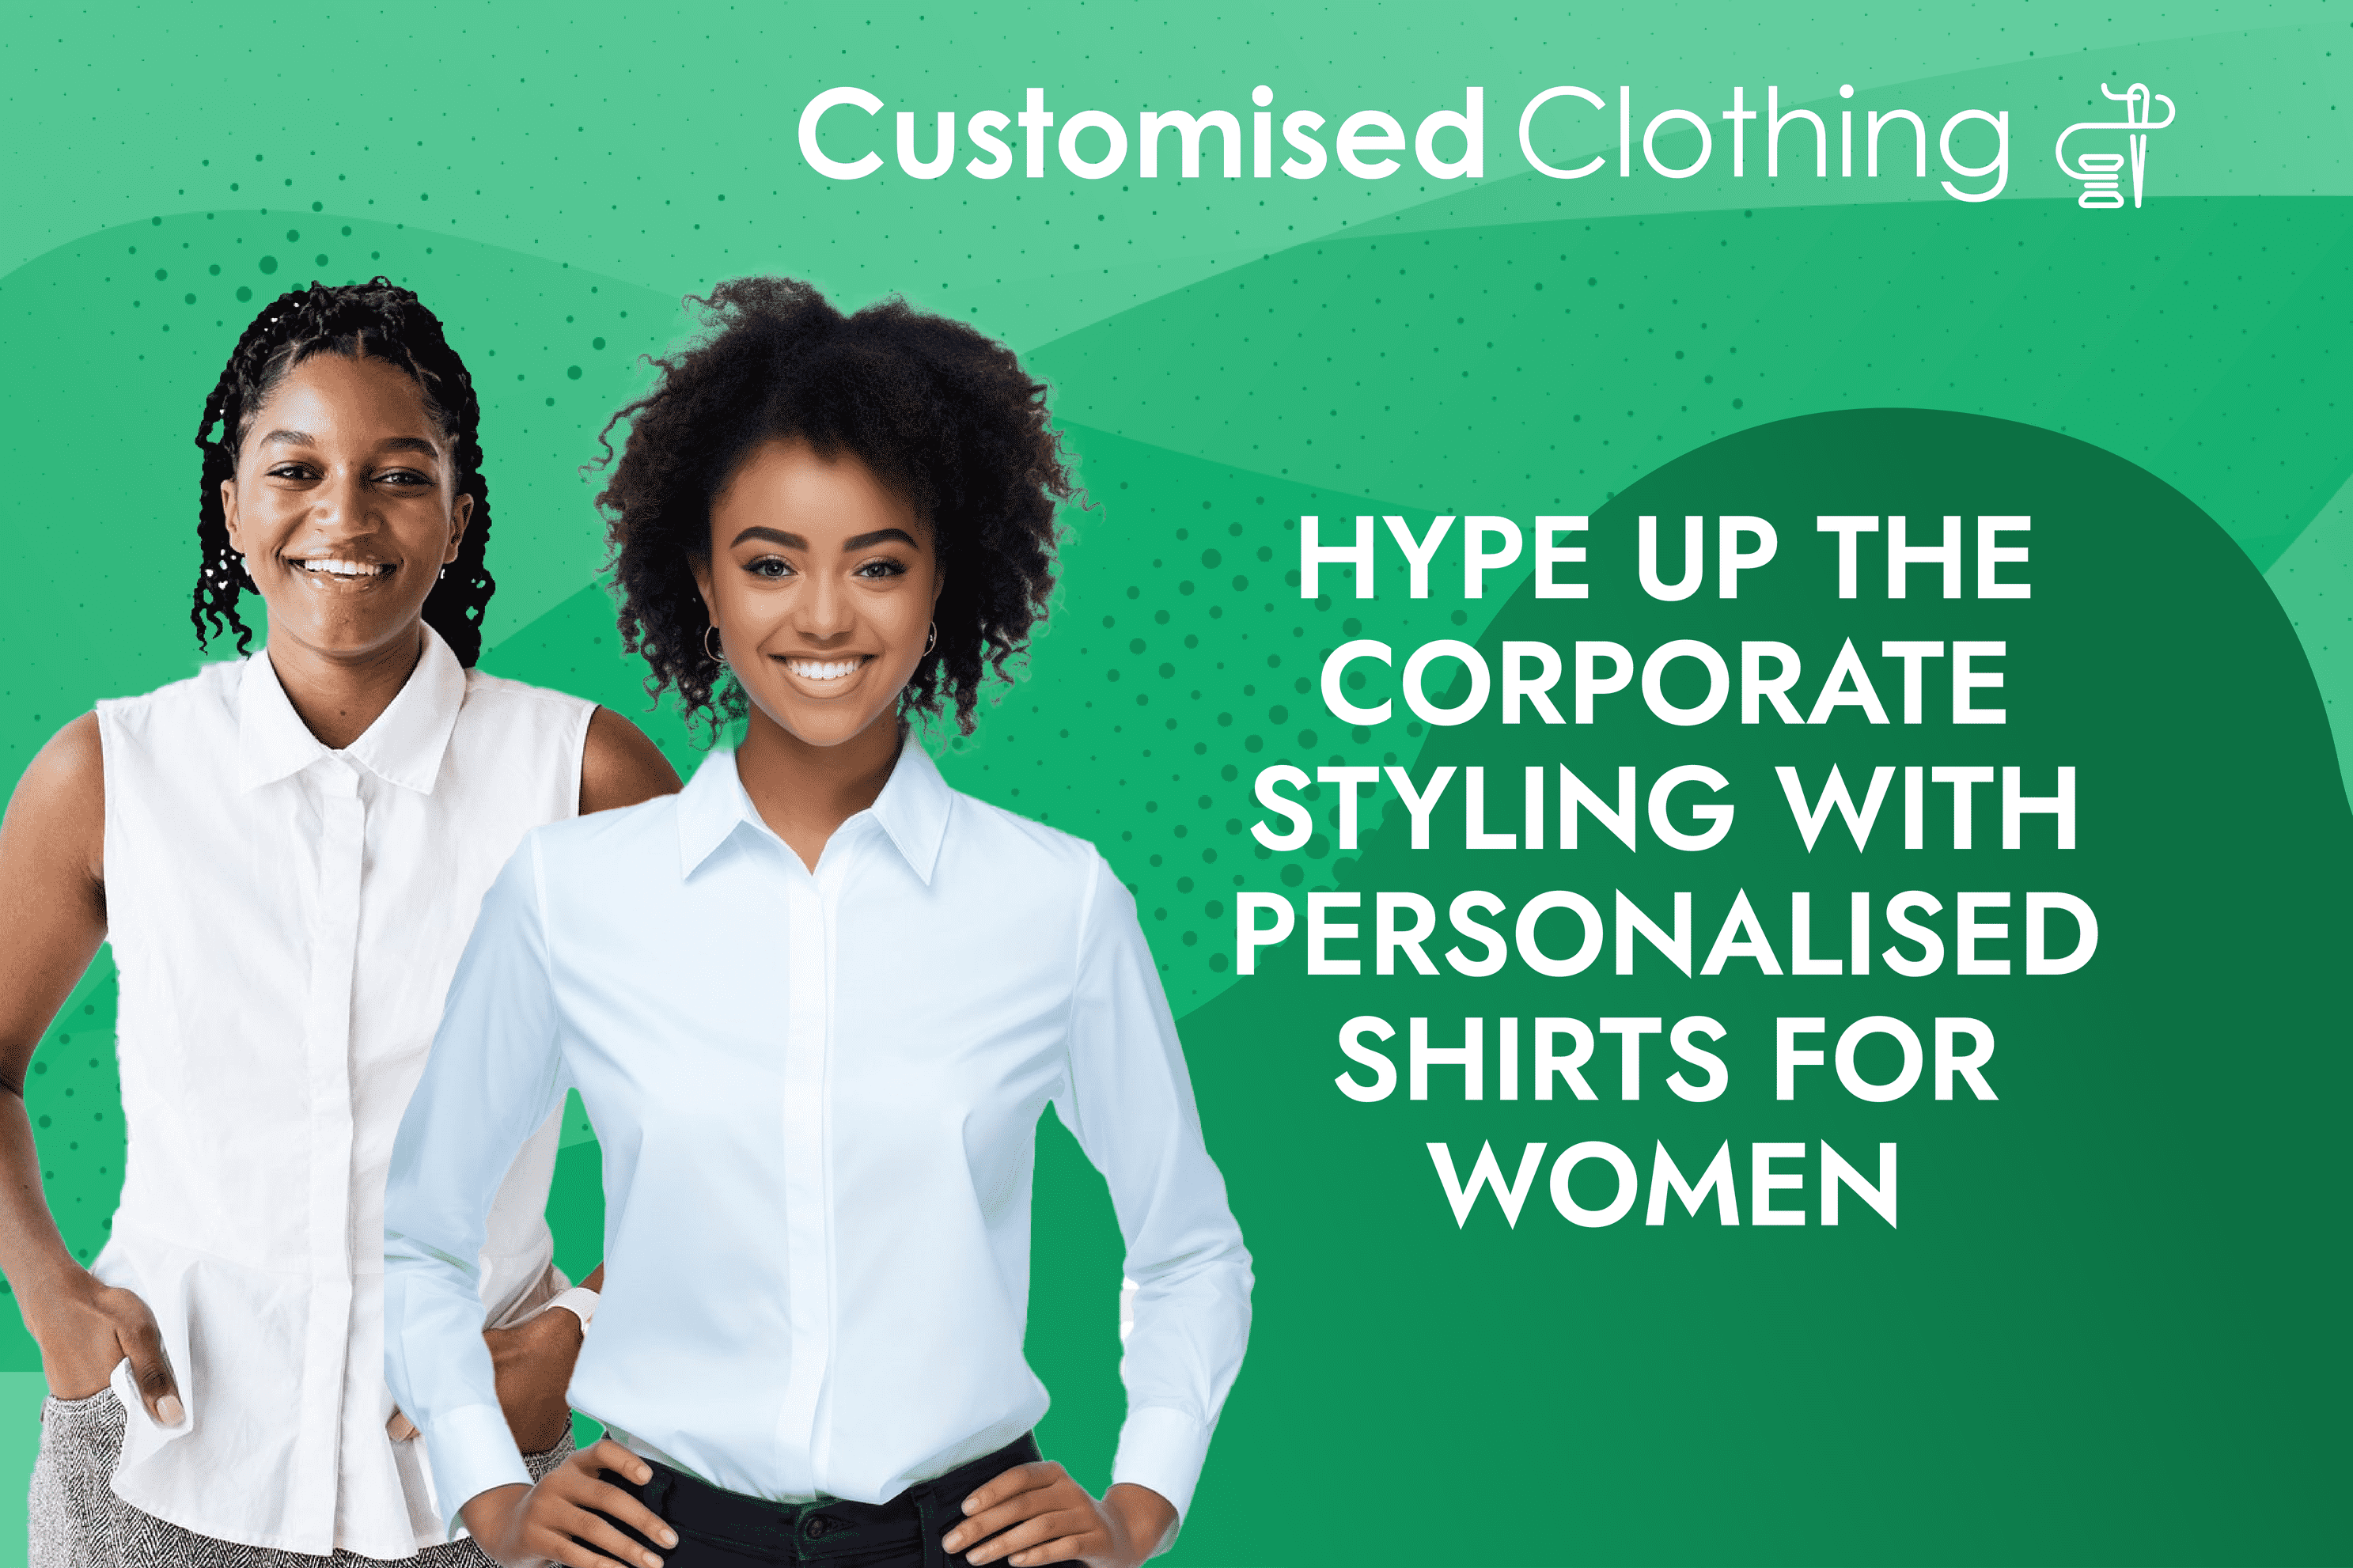 Hype Up the Corporate Styling with Personalised Shirts For Women